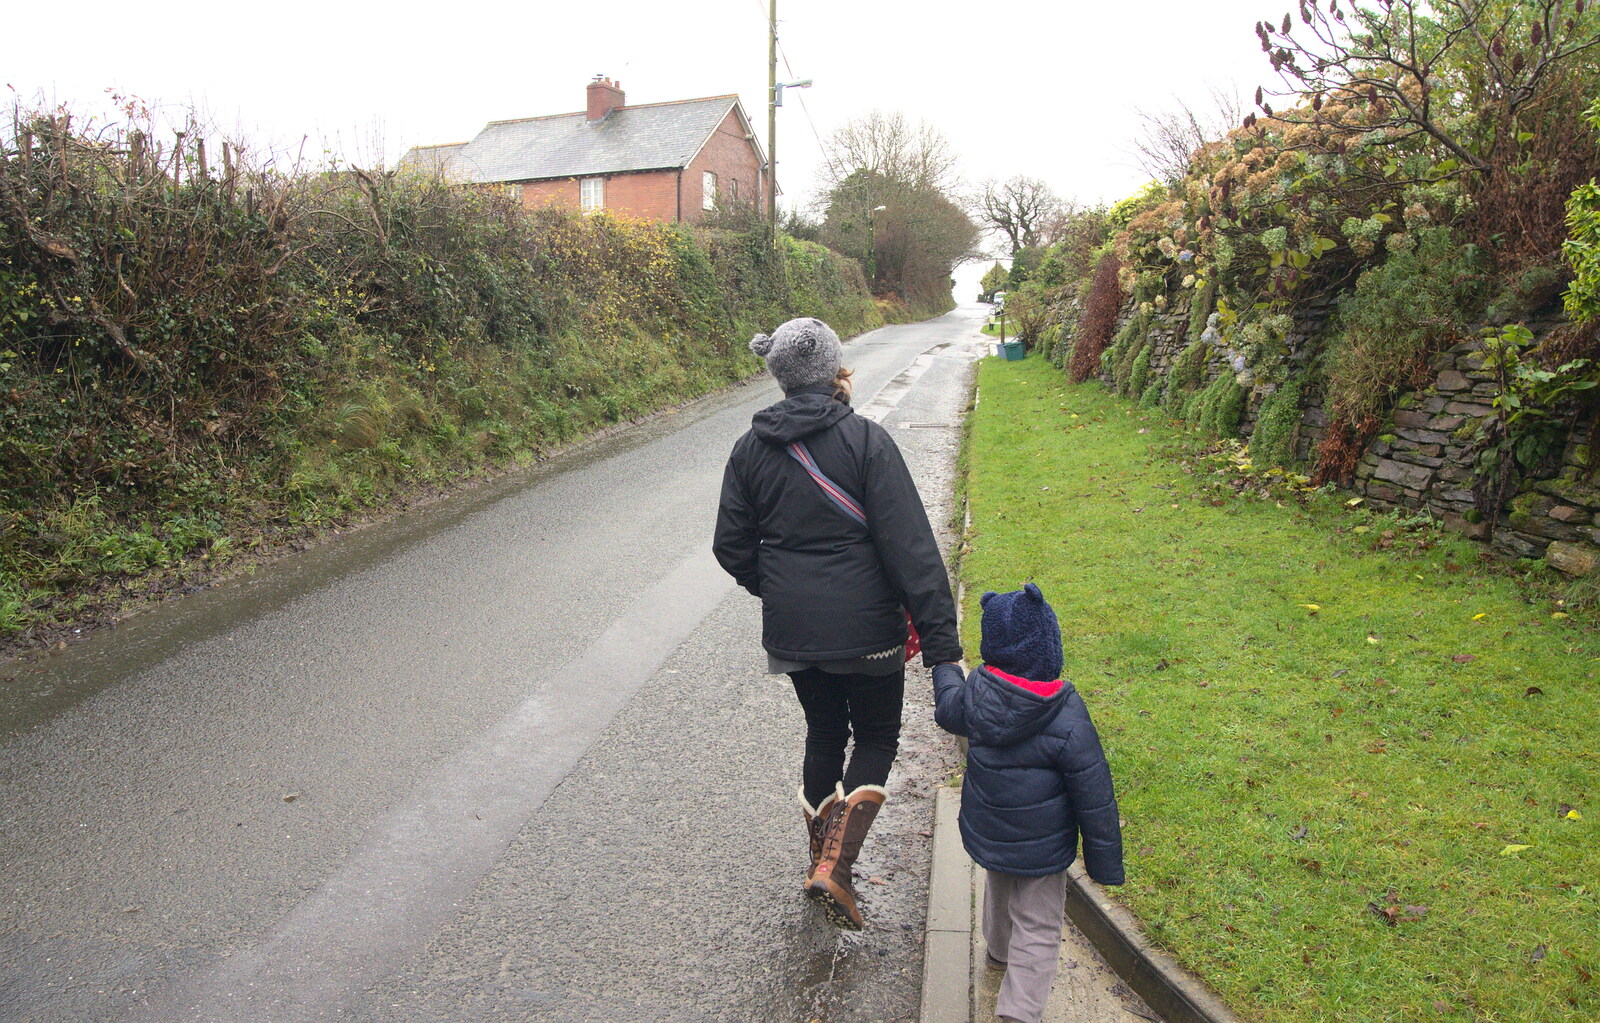 Isobel and Fred walk to the shop from A Trip to Spreyton, Devon - 24th December 2012